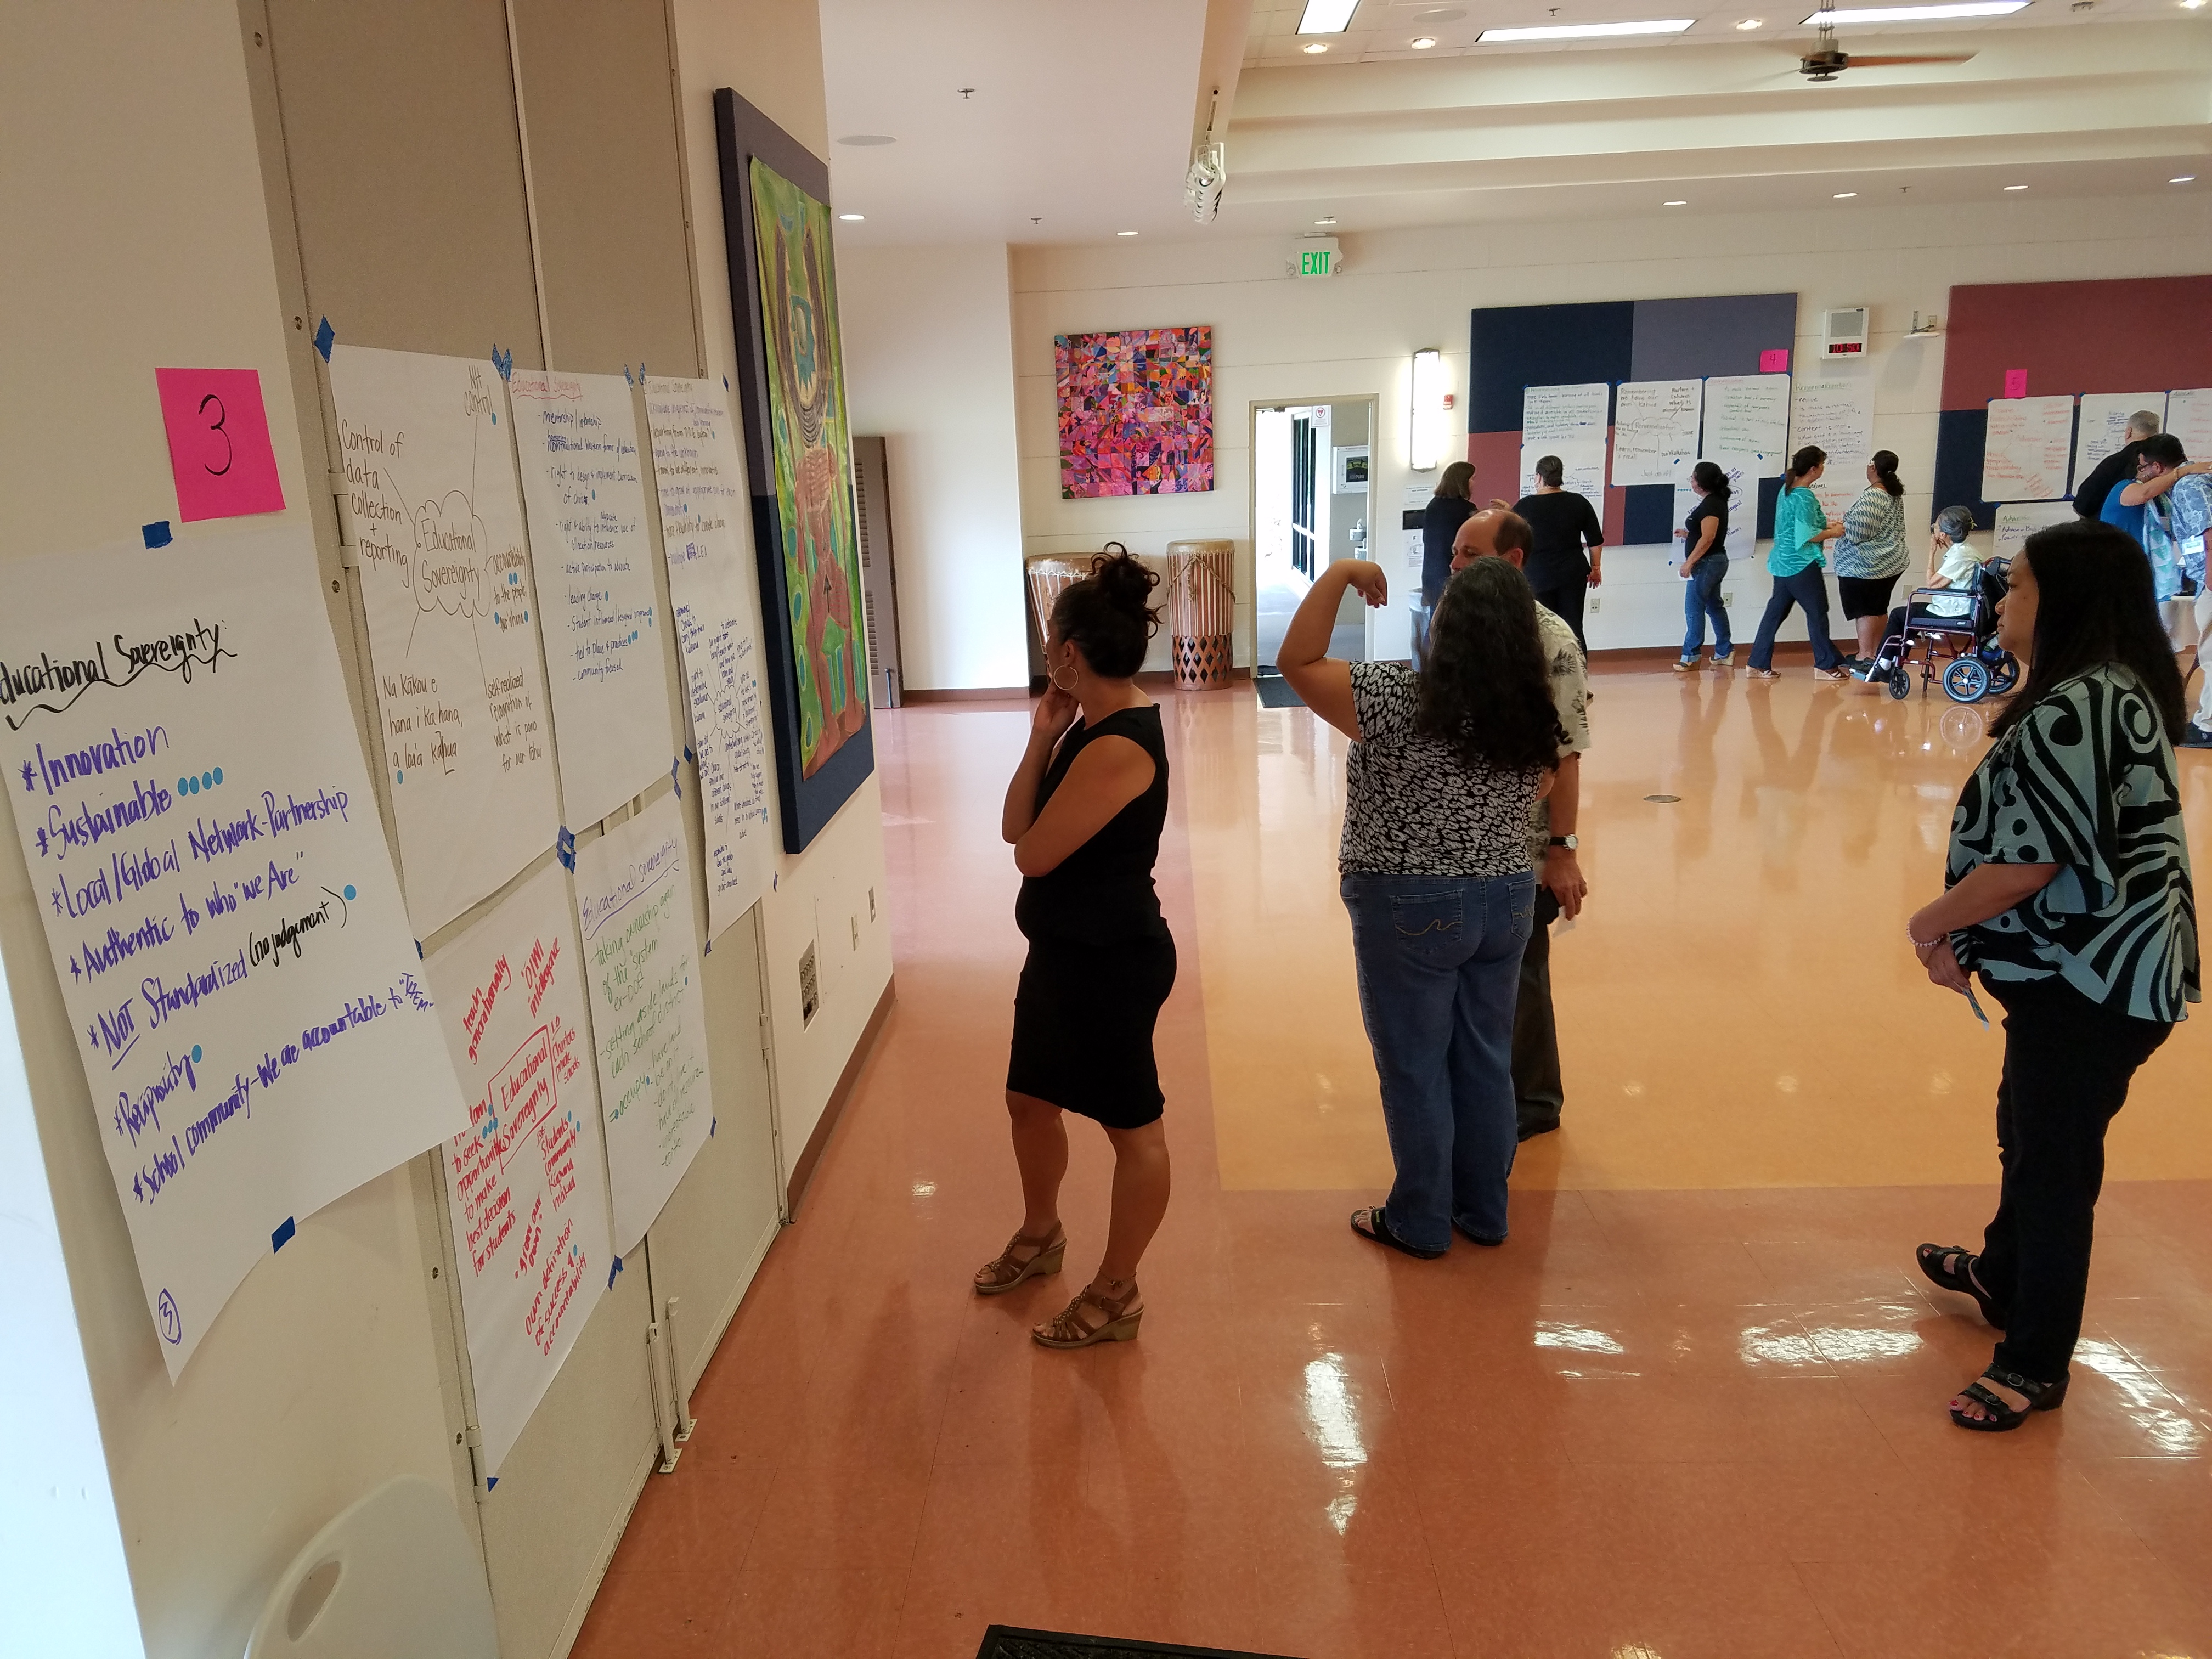 Network participants discuss what theyʻre seeing up on the walls